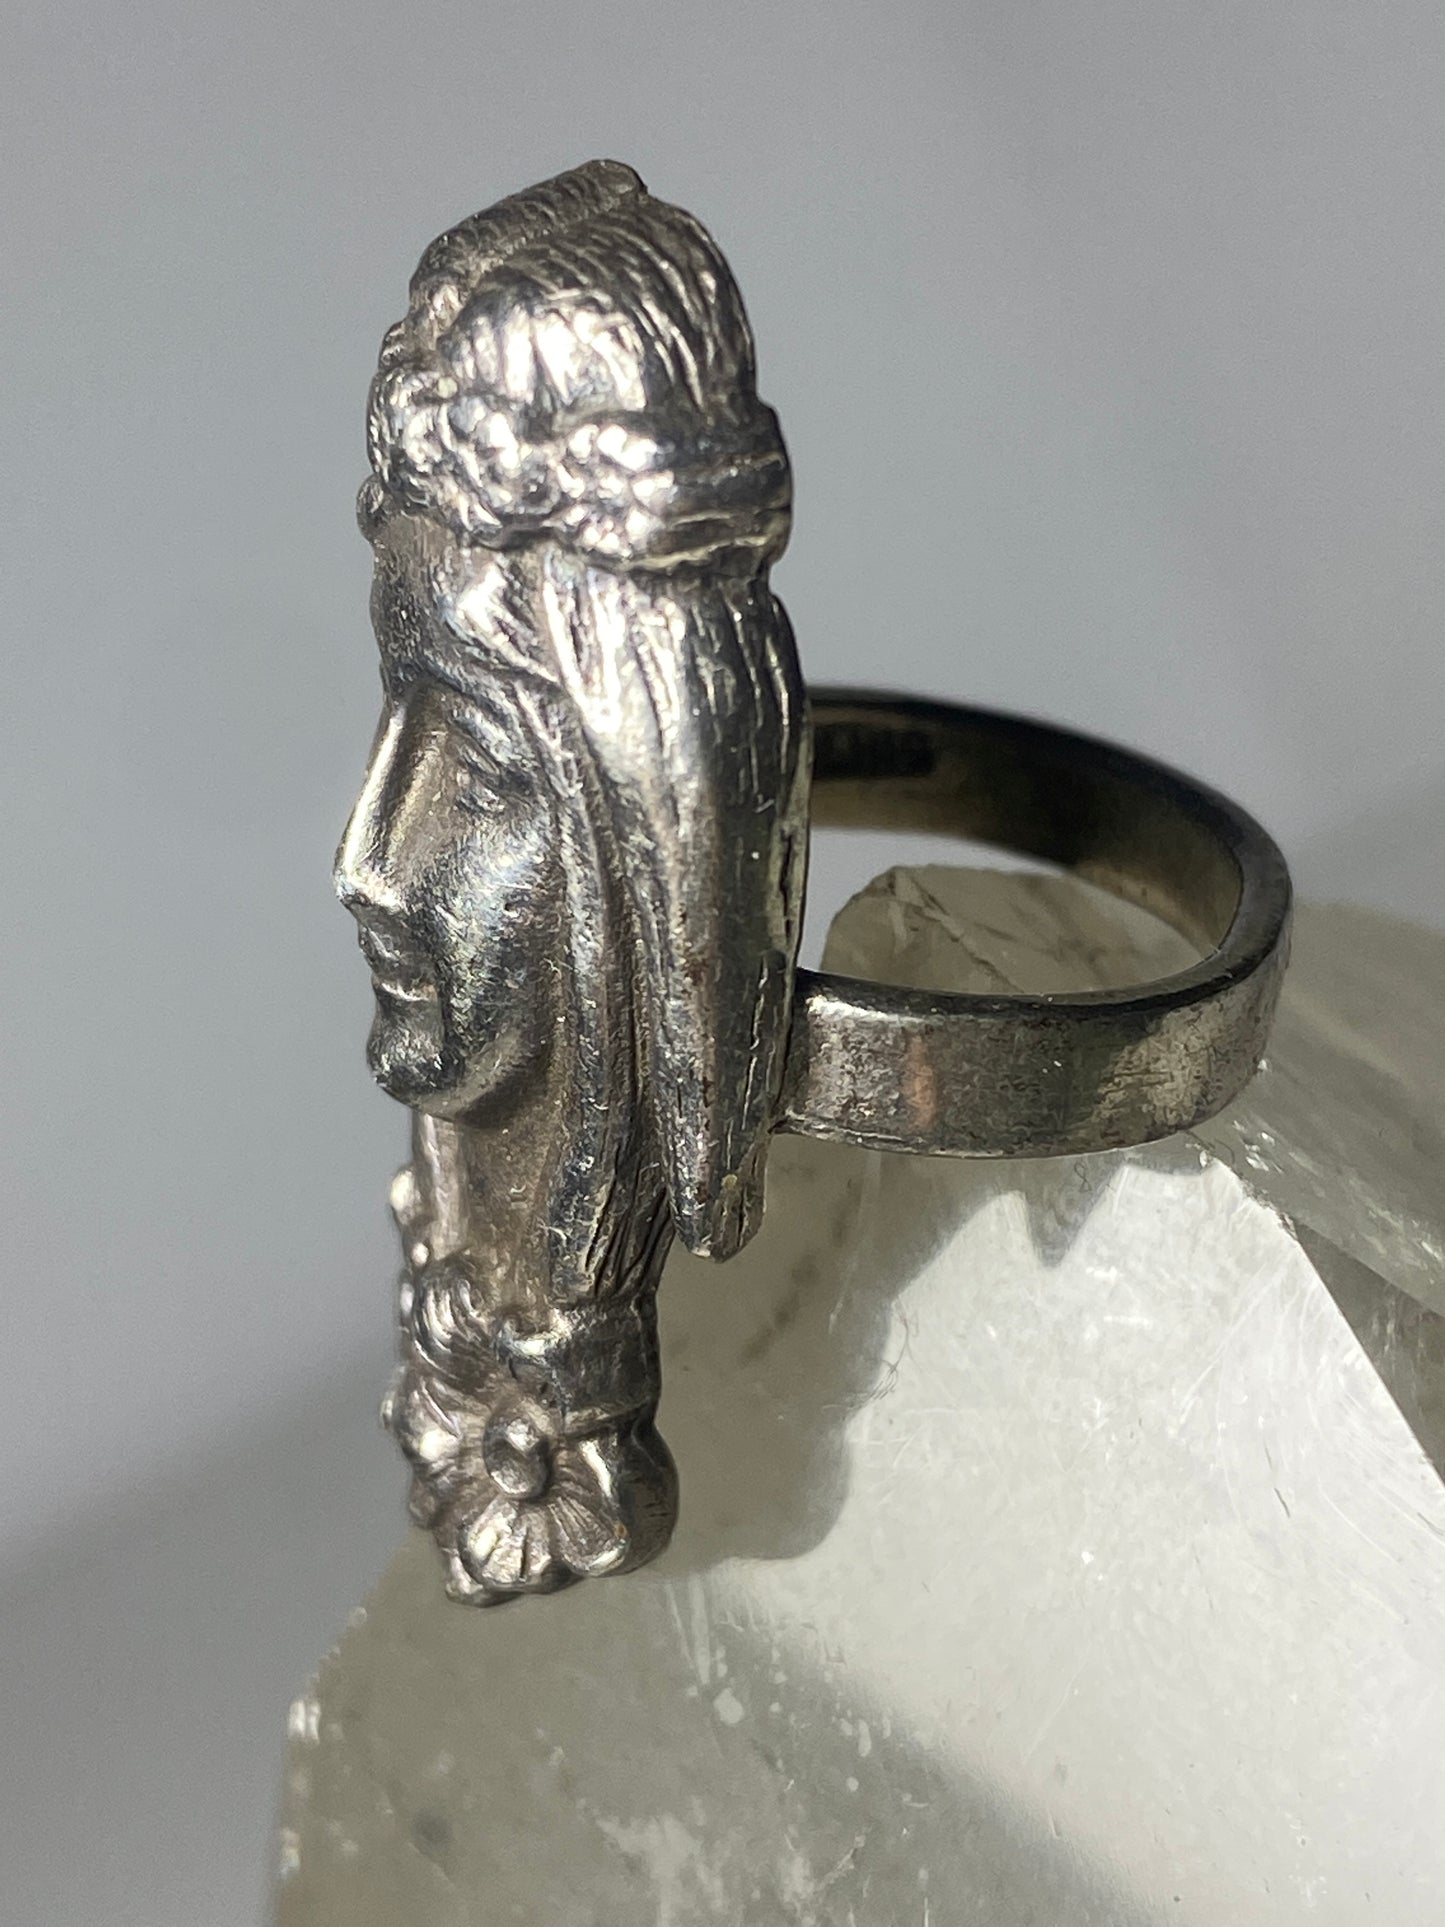 long Face ring deco long hair hippie floral flowers band  sterling silver women girls